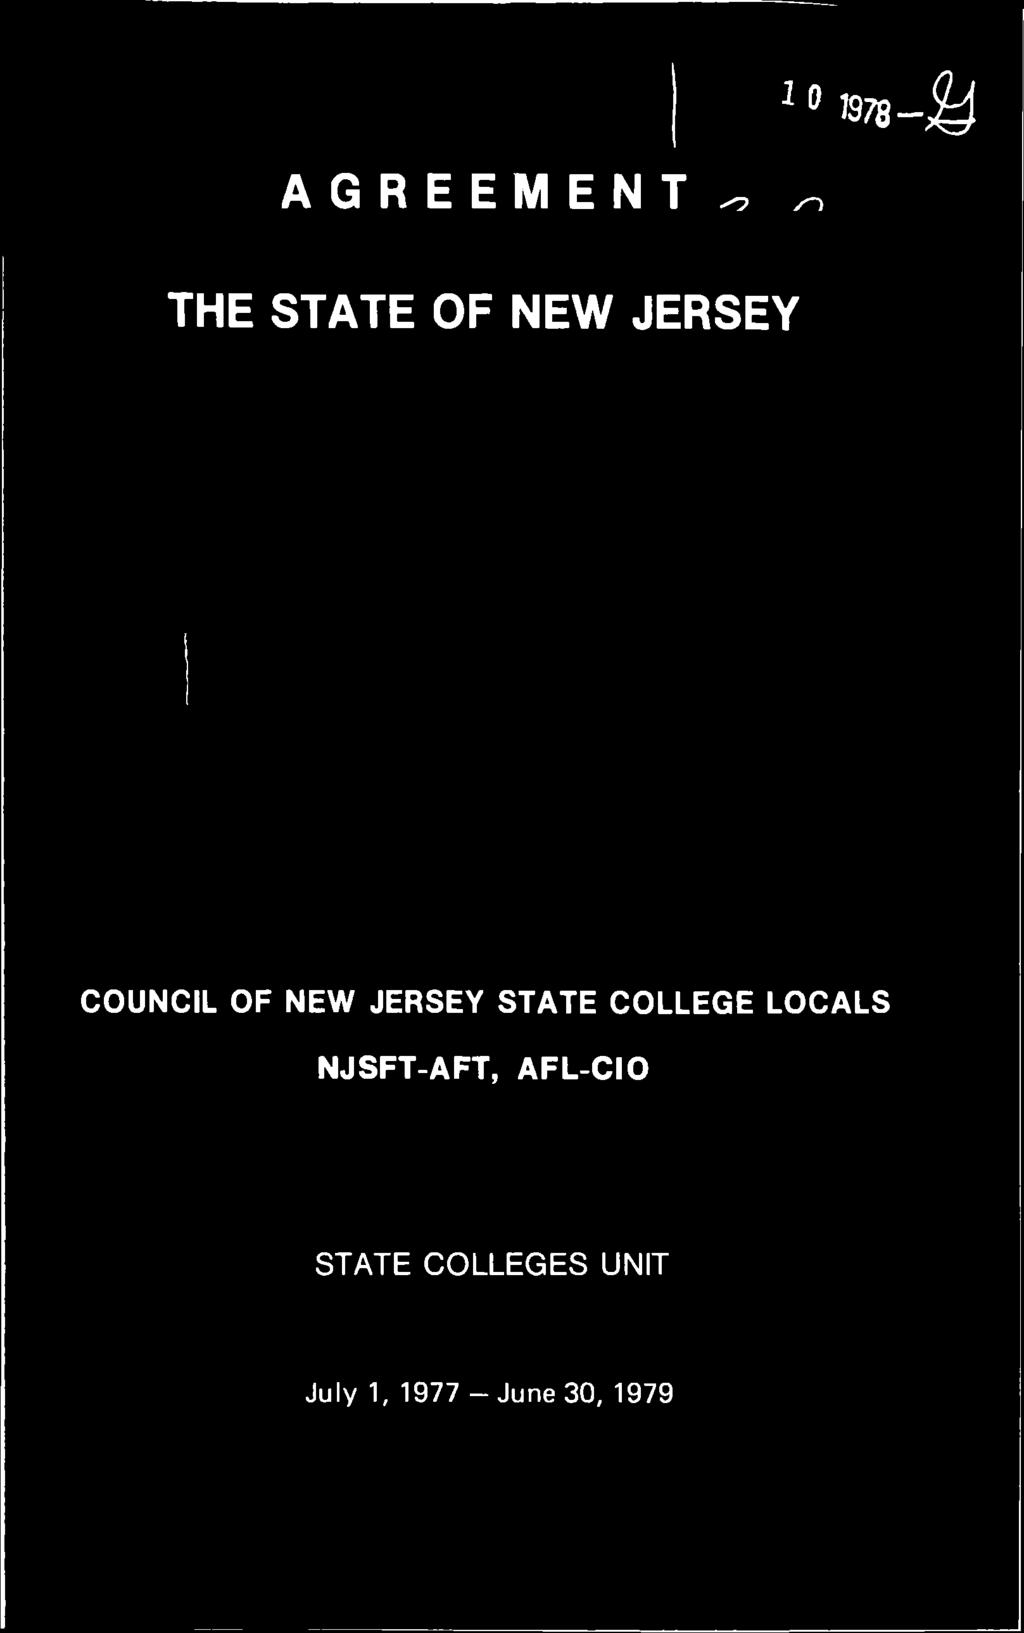 NEW JERSEY STATE